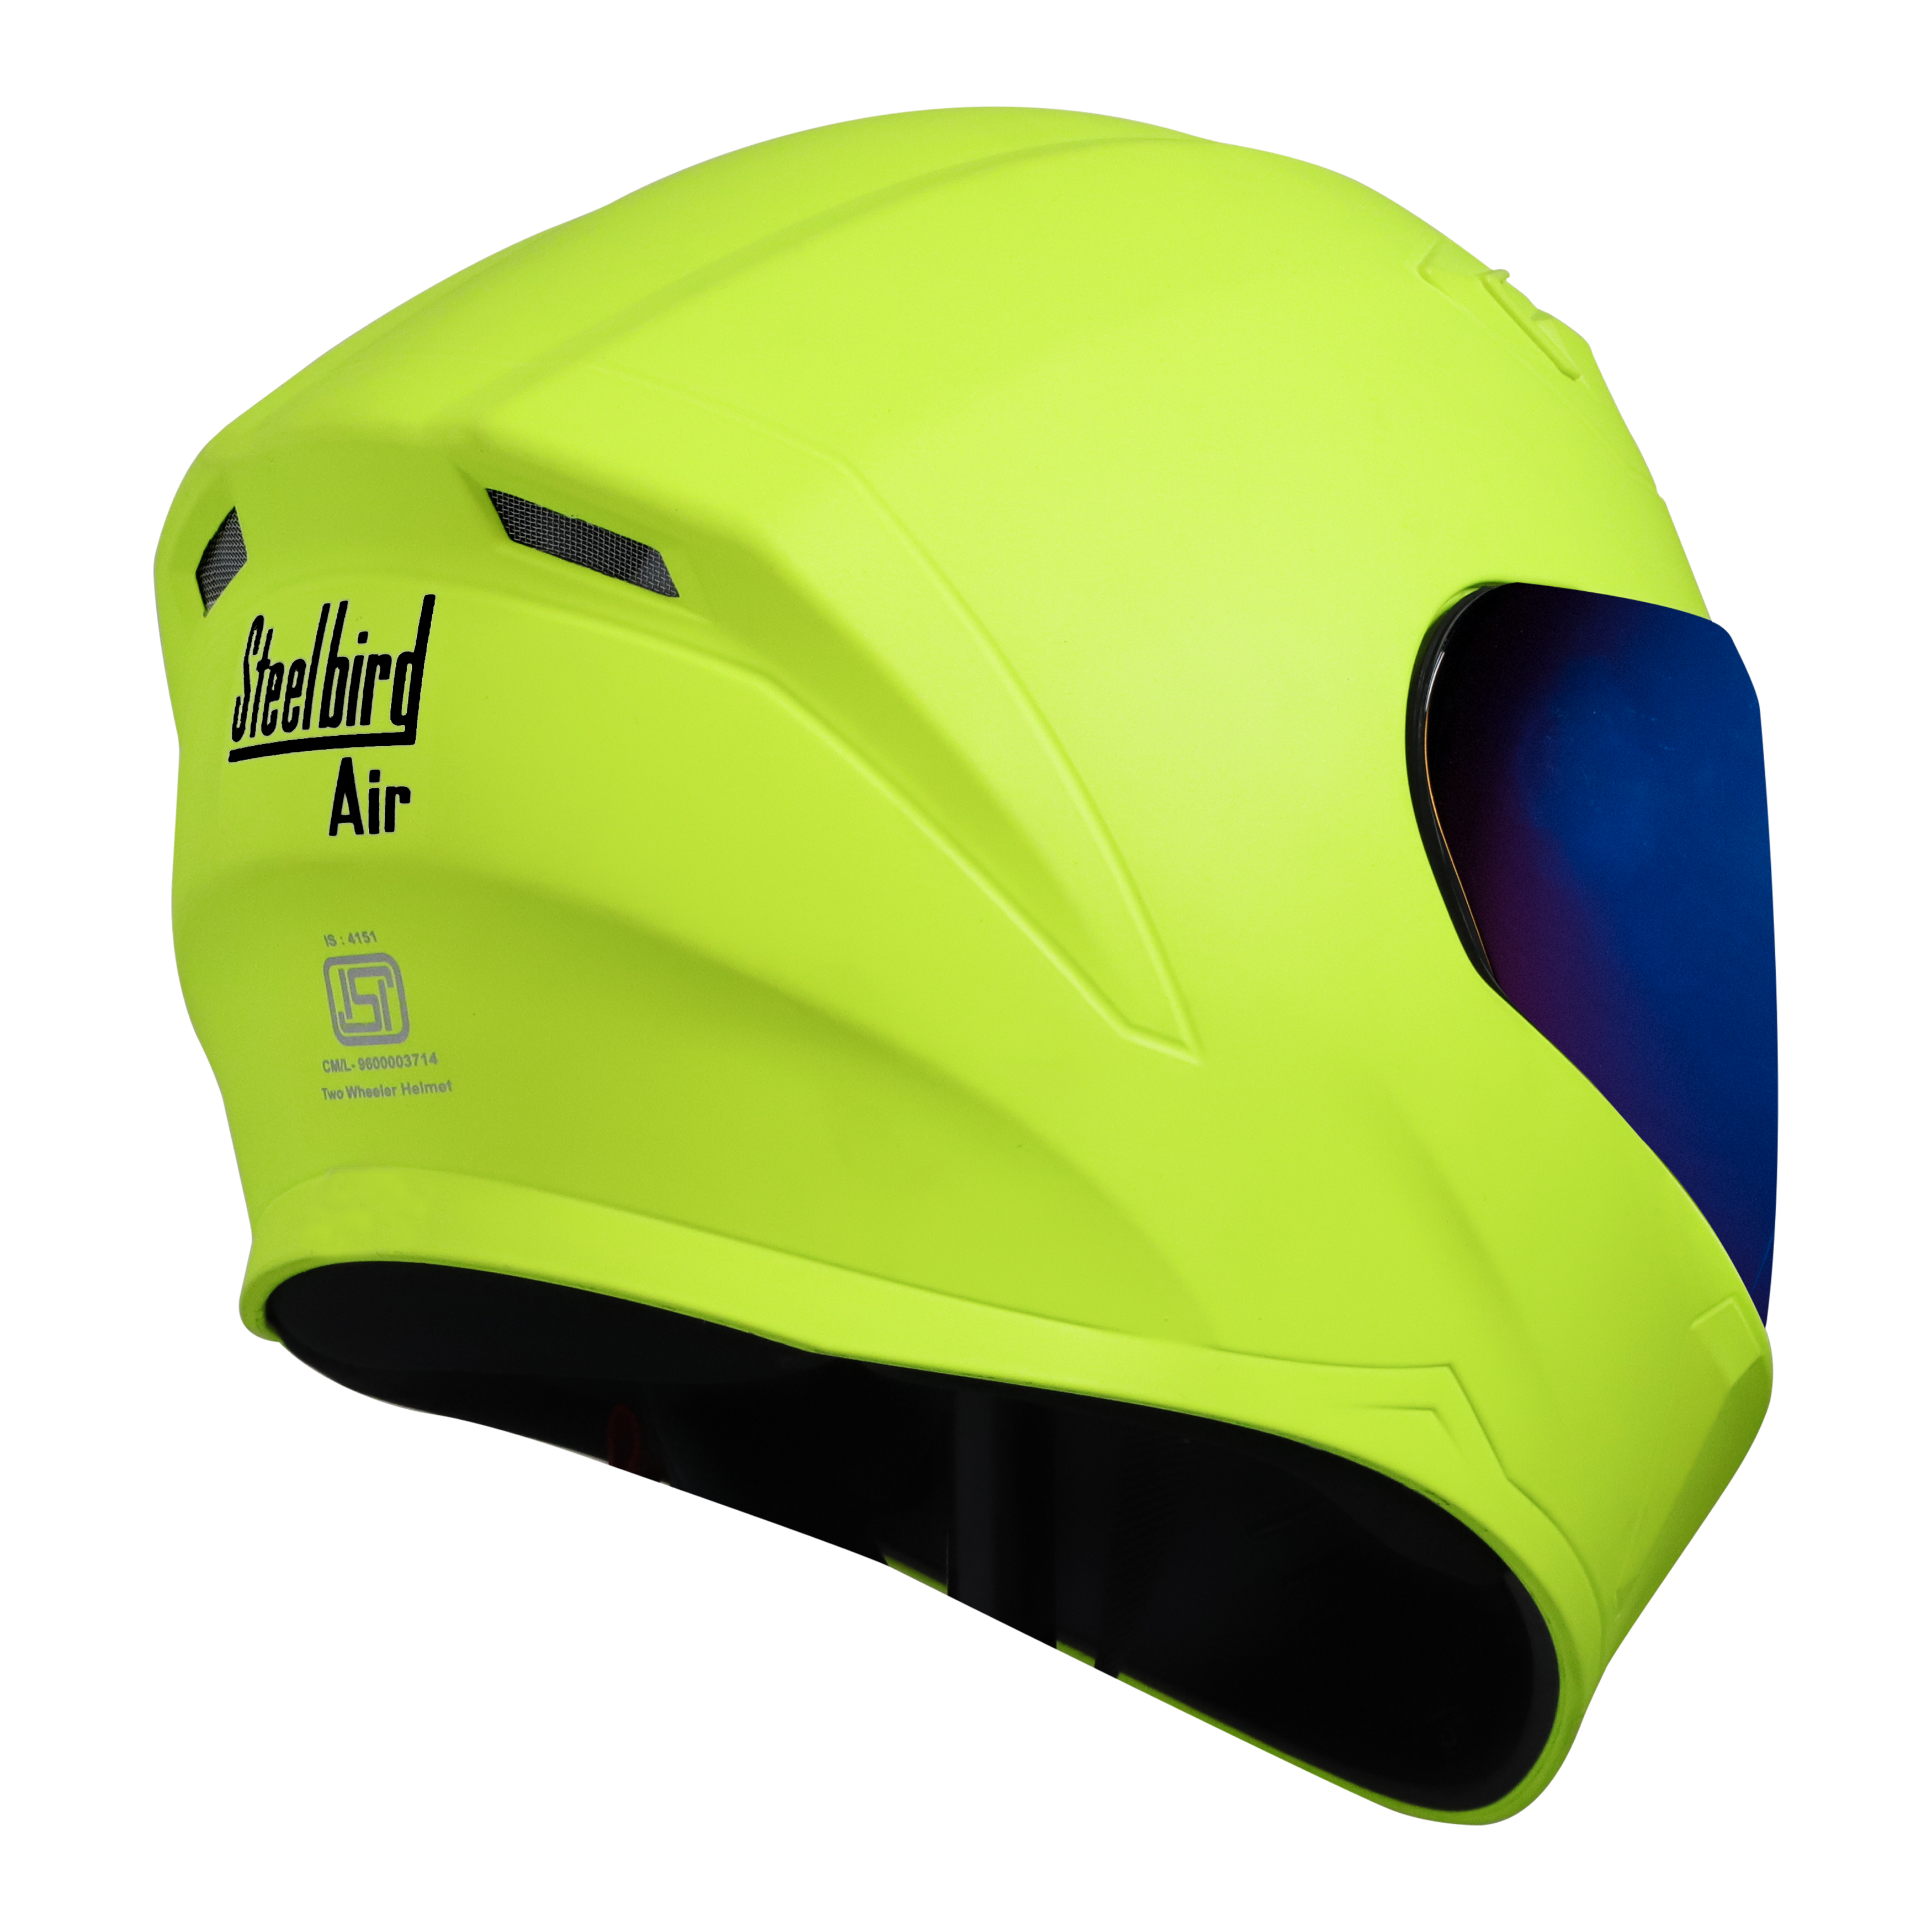 SBA-21 VFX GLOSSY FLUO NEON ( FITTED WITH CLEAR VISOR EXTRA CHROME BLUE VISOR FREE)